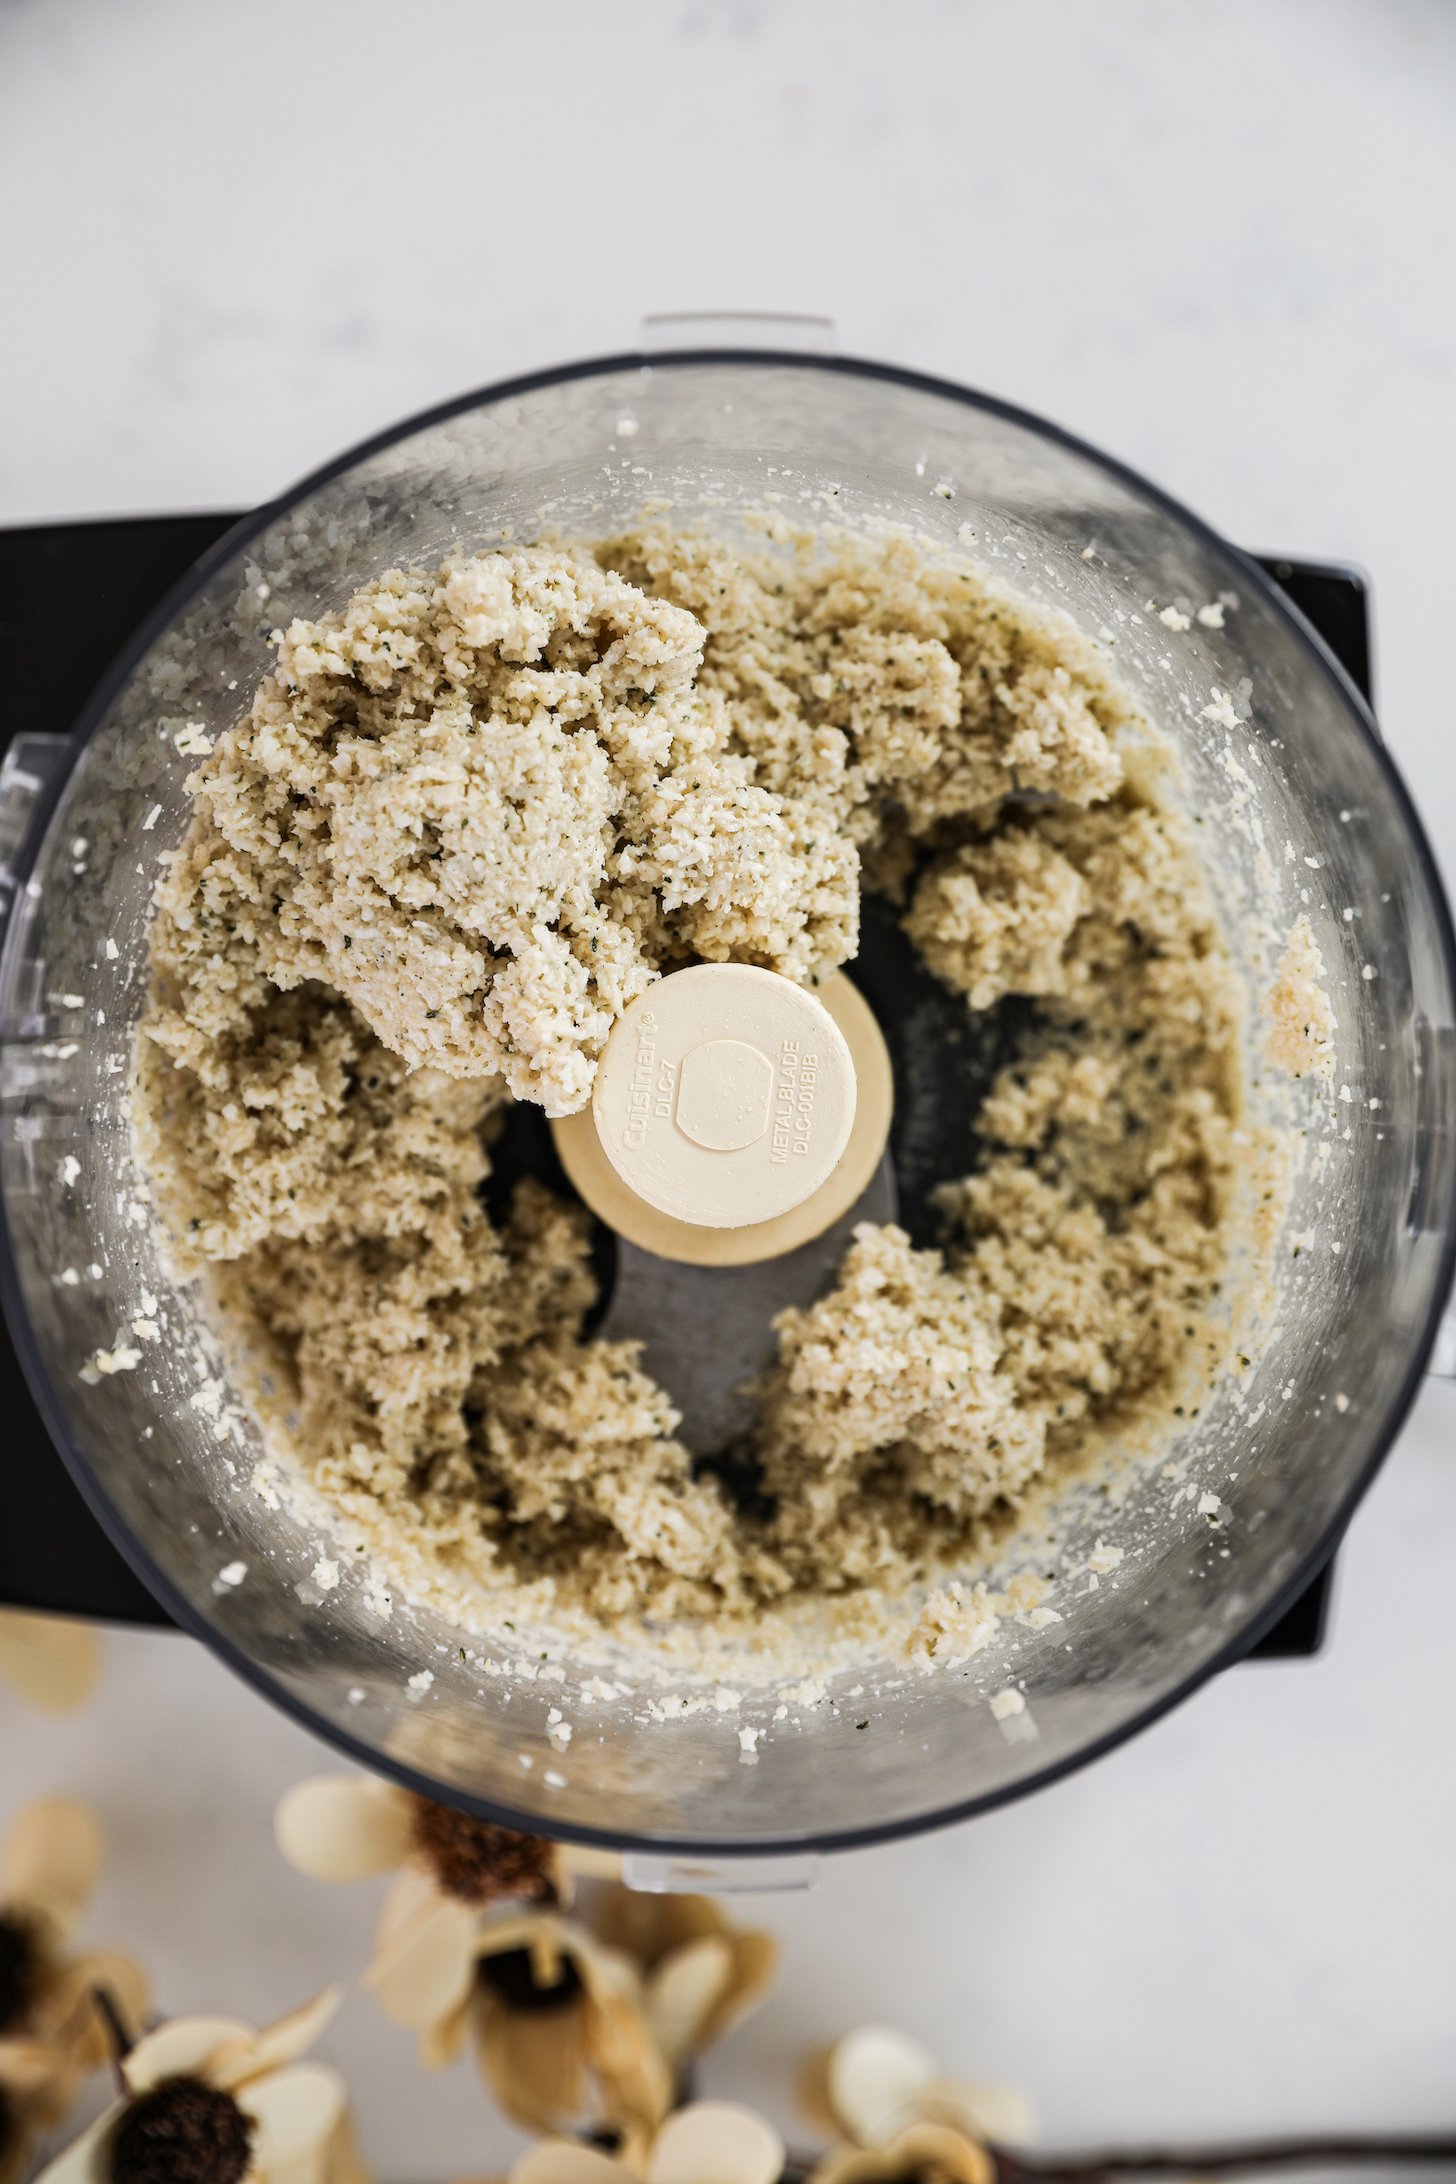 An overhead view of a food processor with finely processed coconut and seeds.